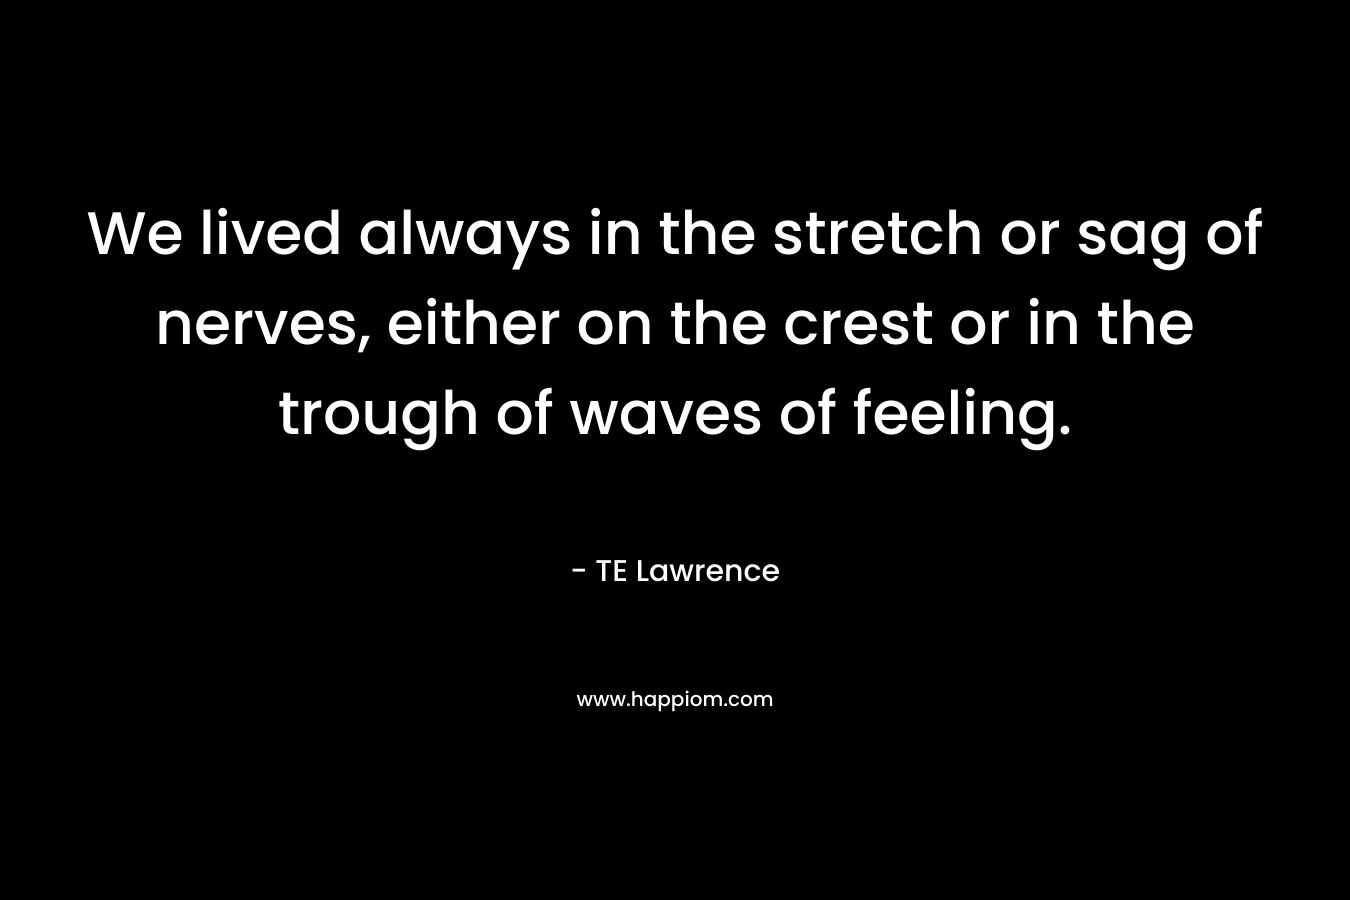 We lived always in the stretch or sag of nerves, either on the crest or in the trough of waves of feeling. – TE Lawrence